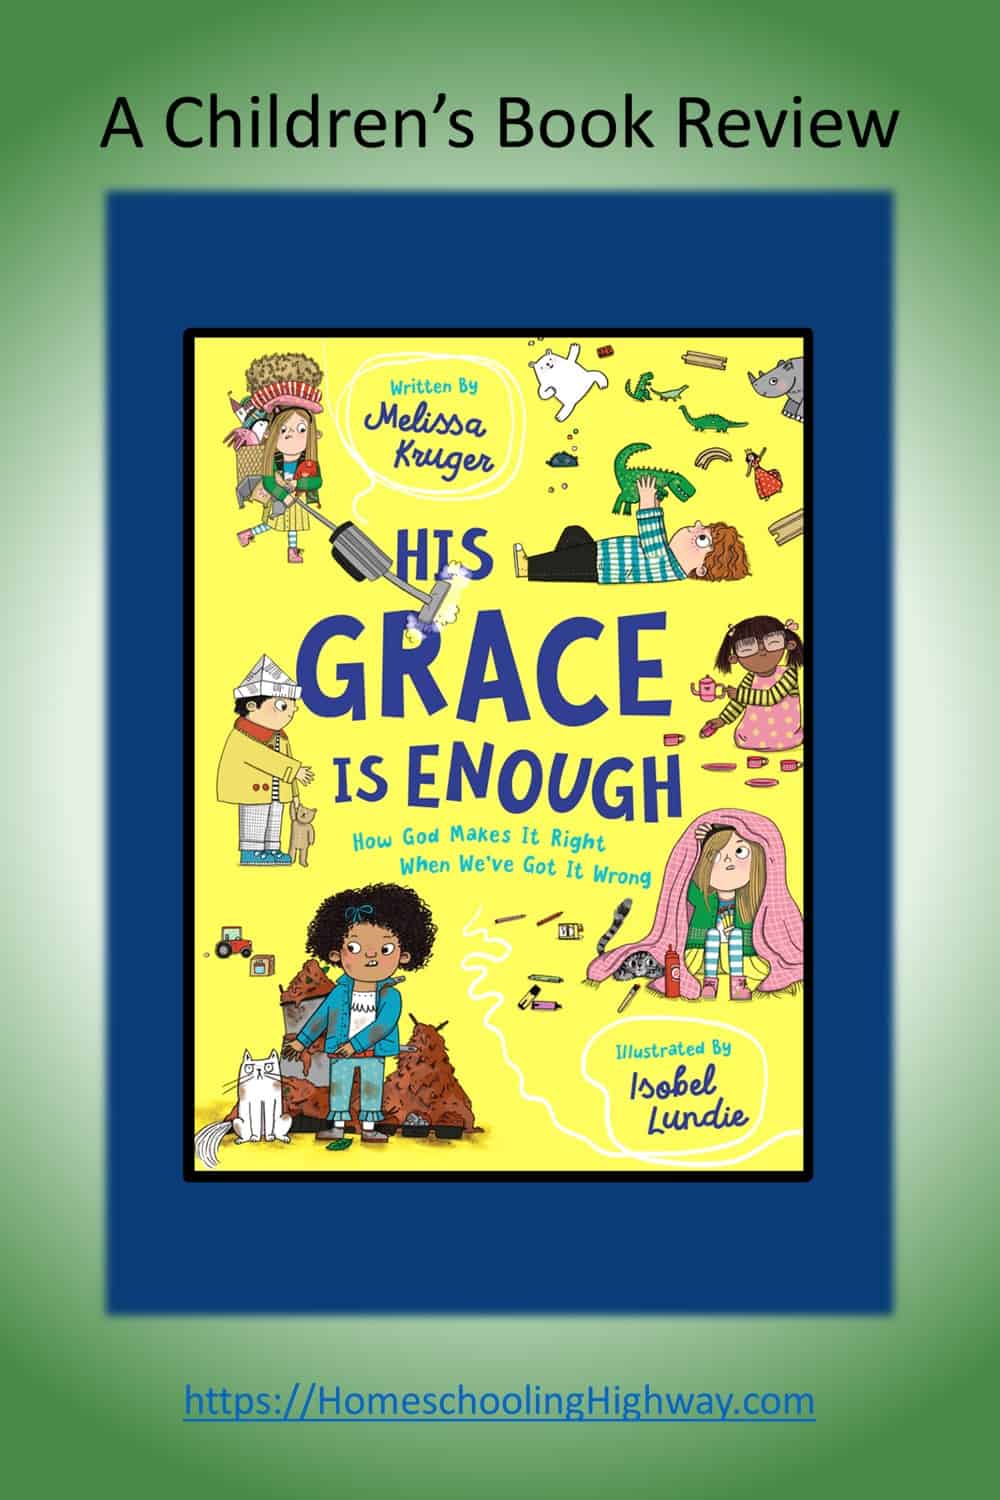 Cover image for His Grace is Enough, written by Melissa Kruger. Book review by Homeschooling Highway